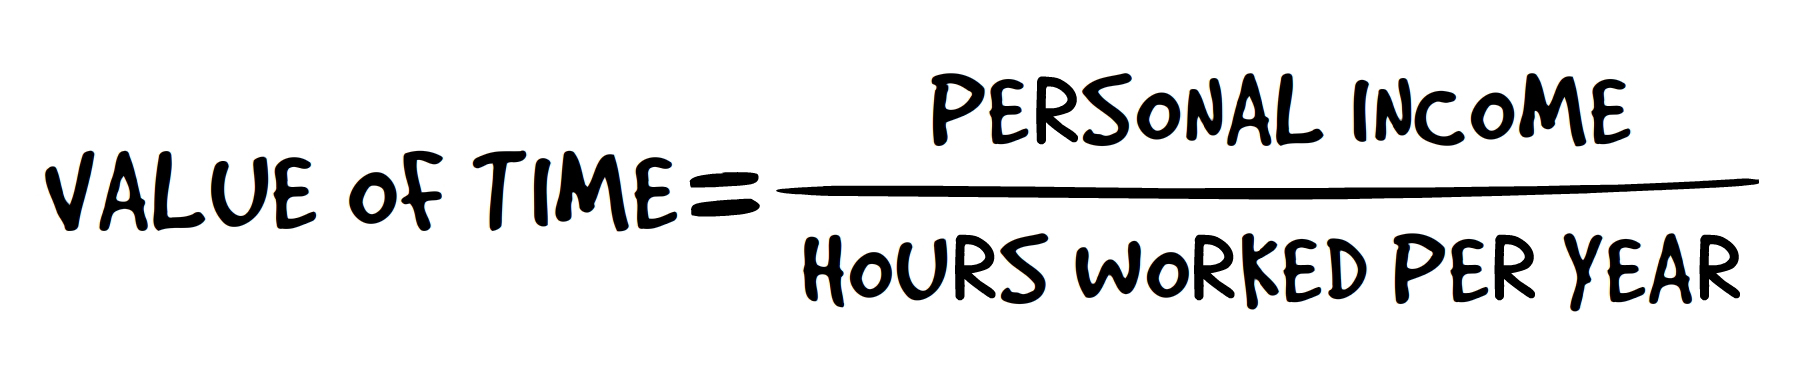 value of time